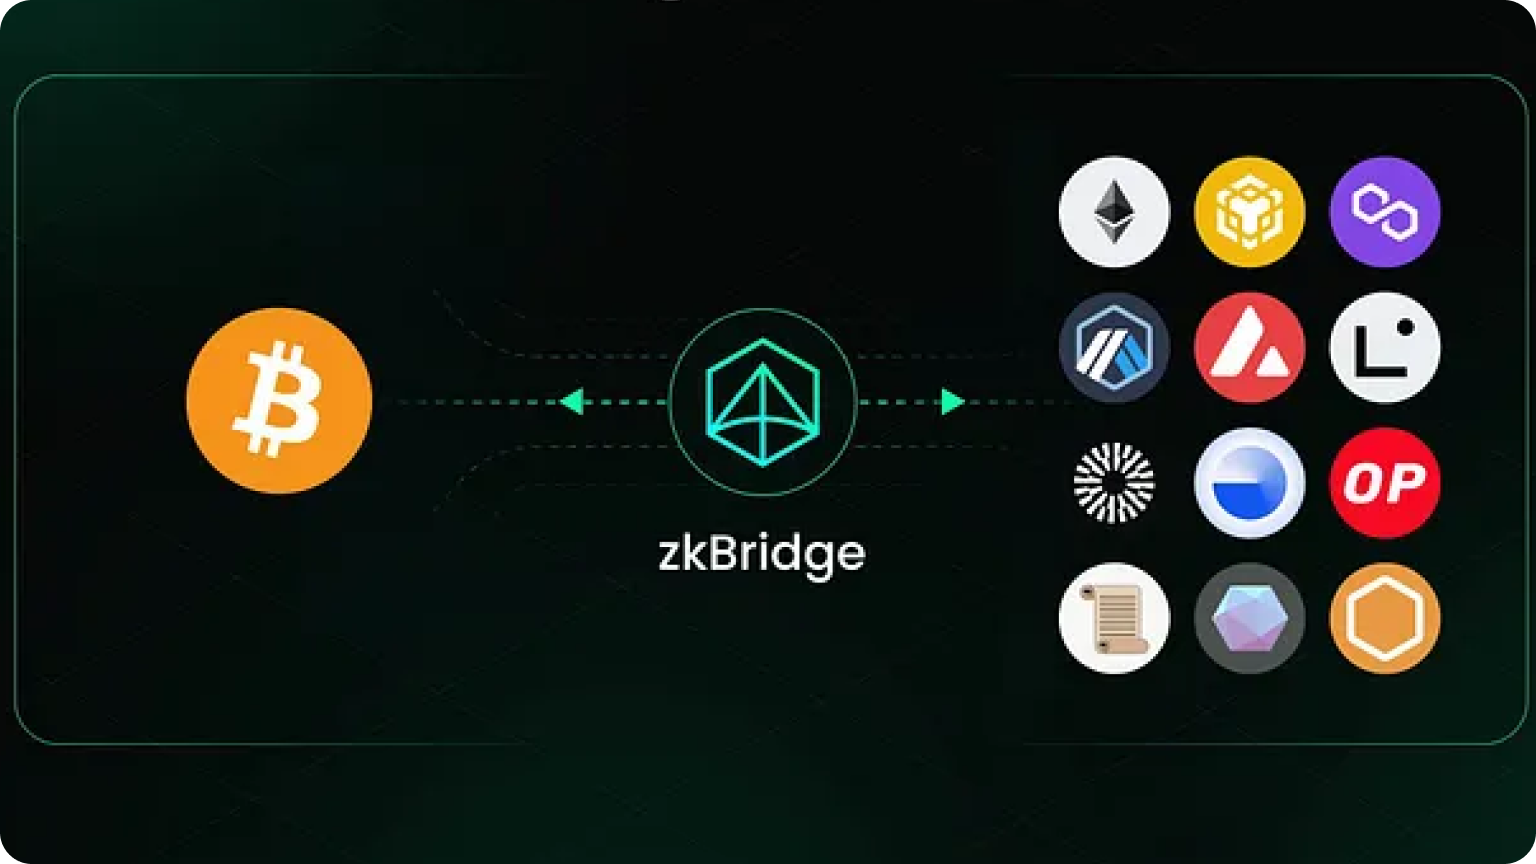 Introducing the Bitcoin Messaging Protocol with zkBridge